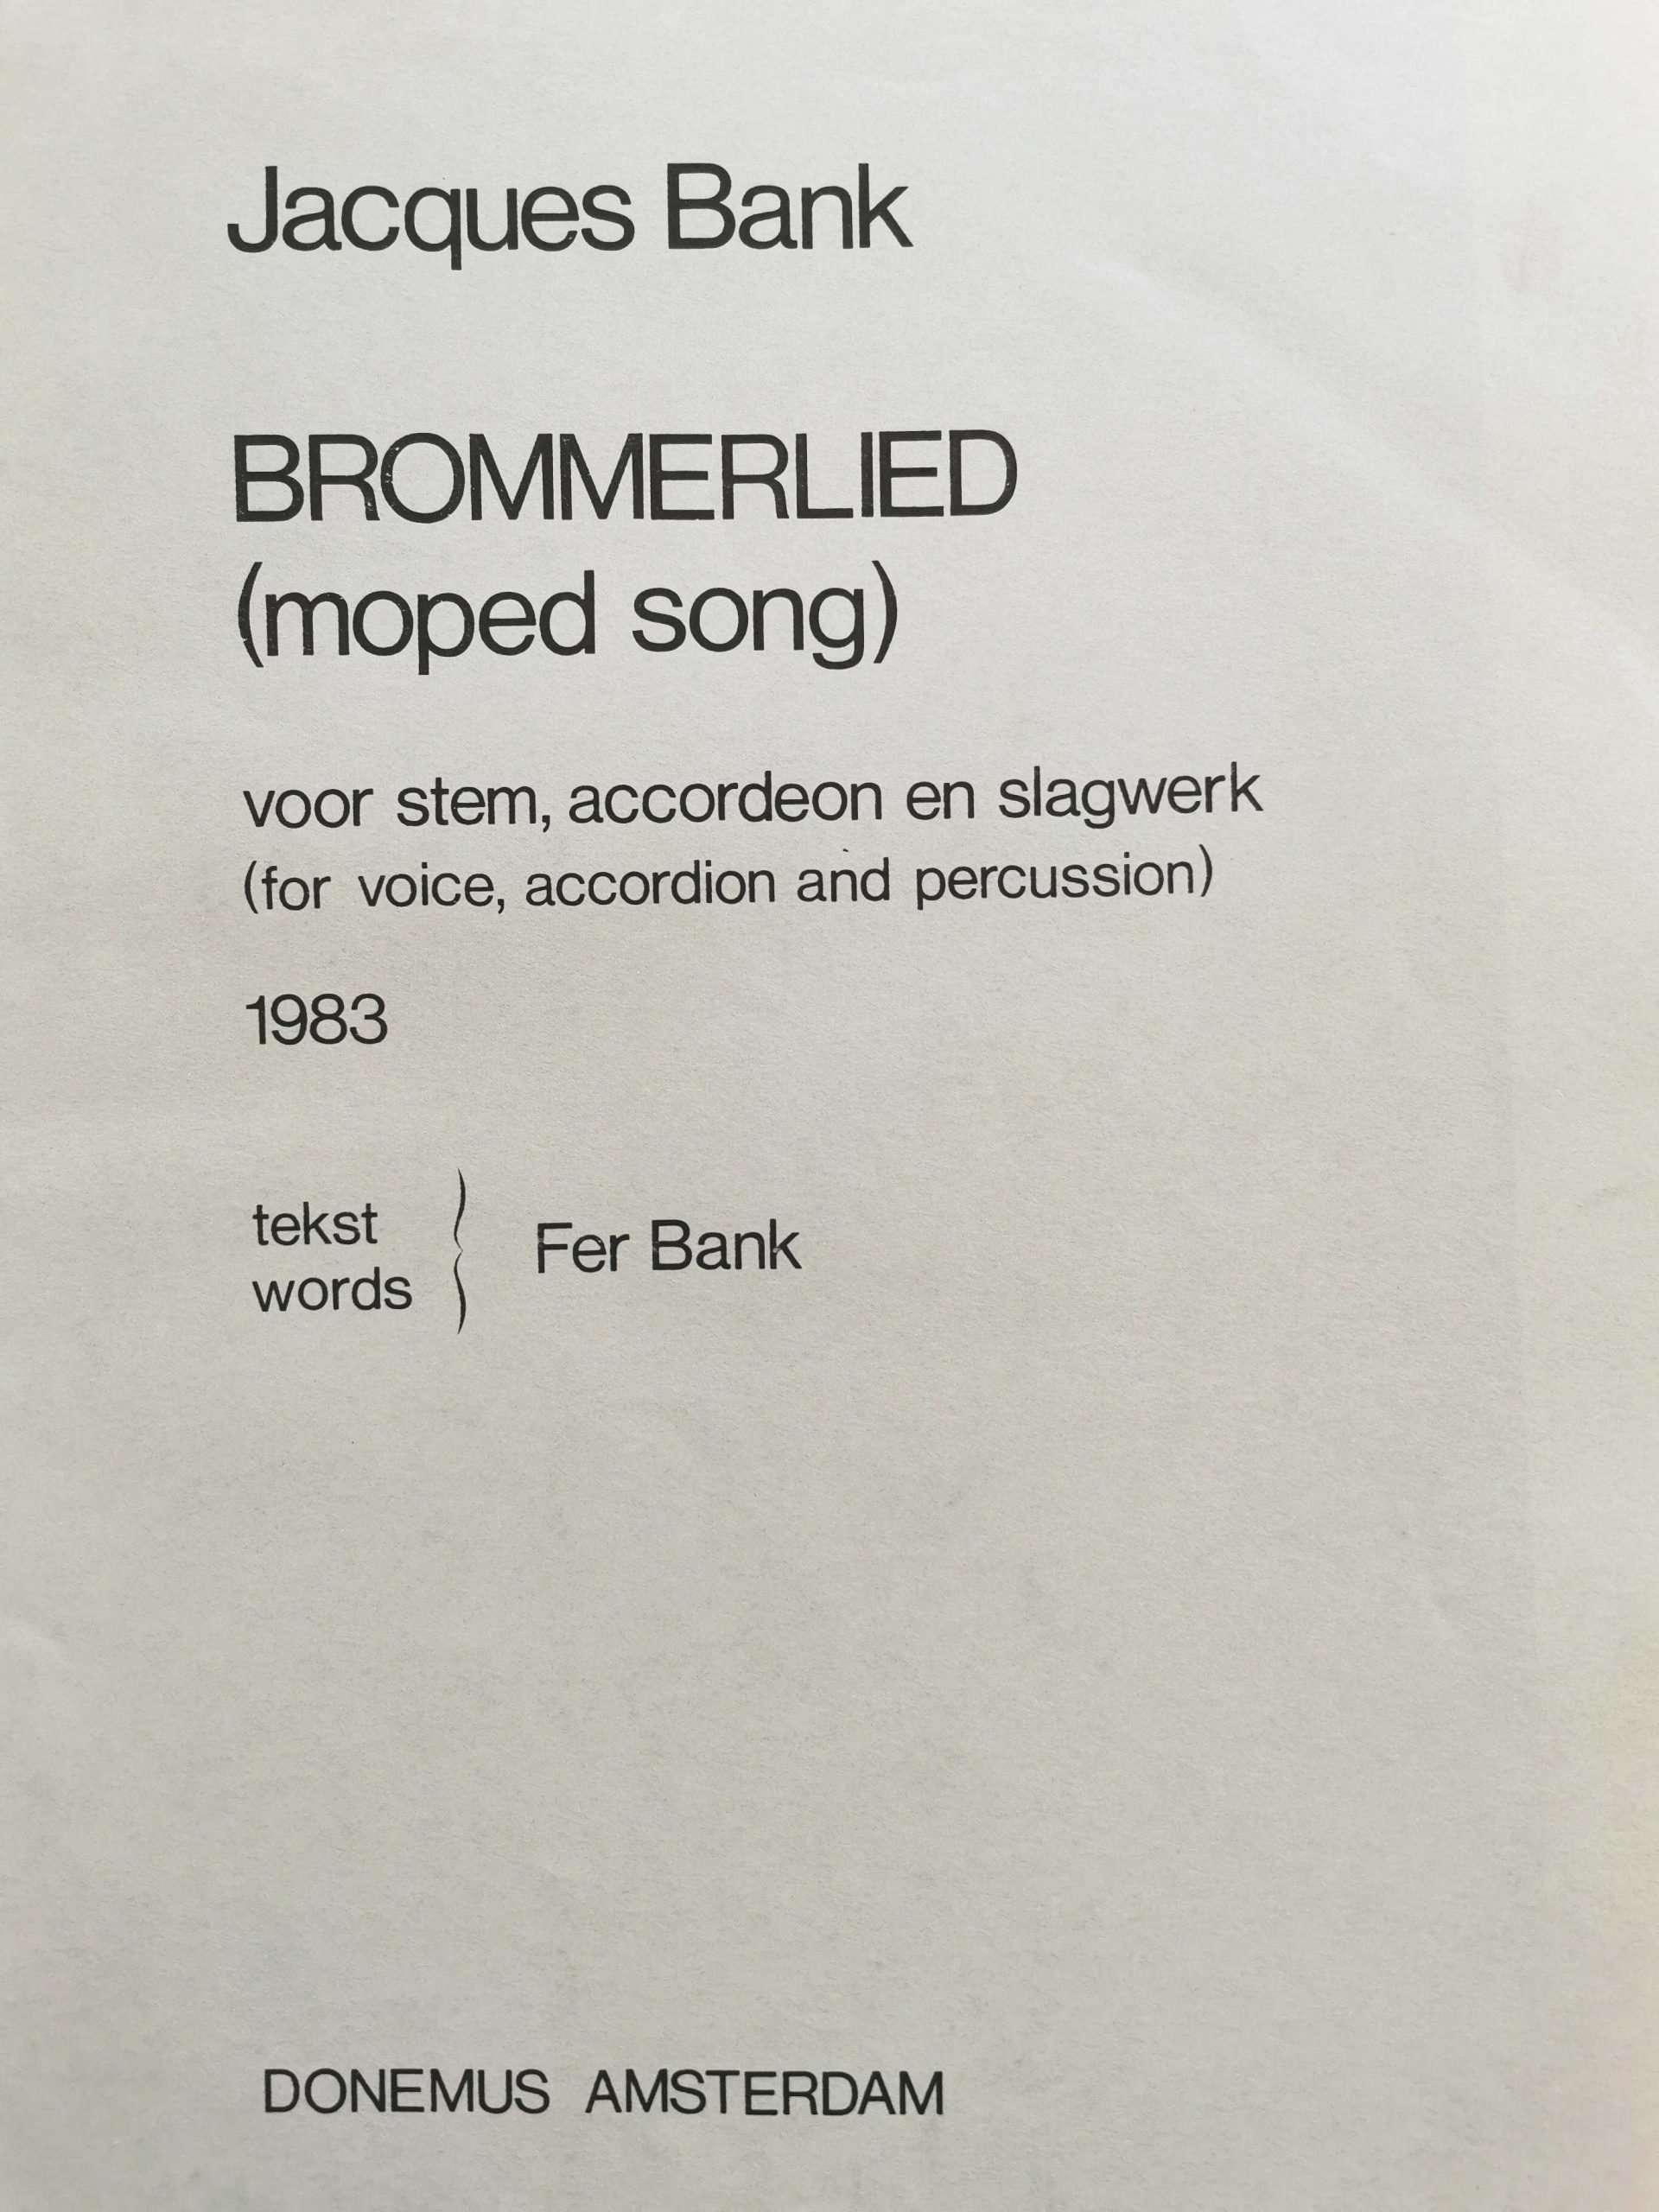 Brommerlied (moped song) by Jacques Bank